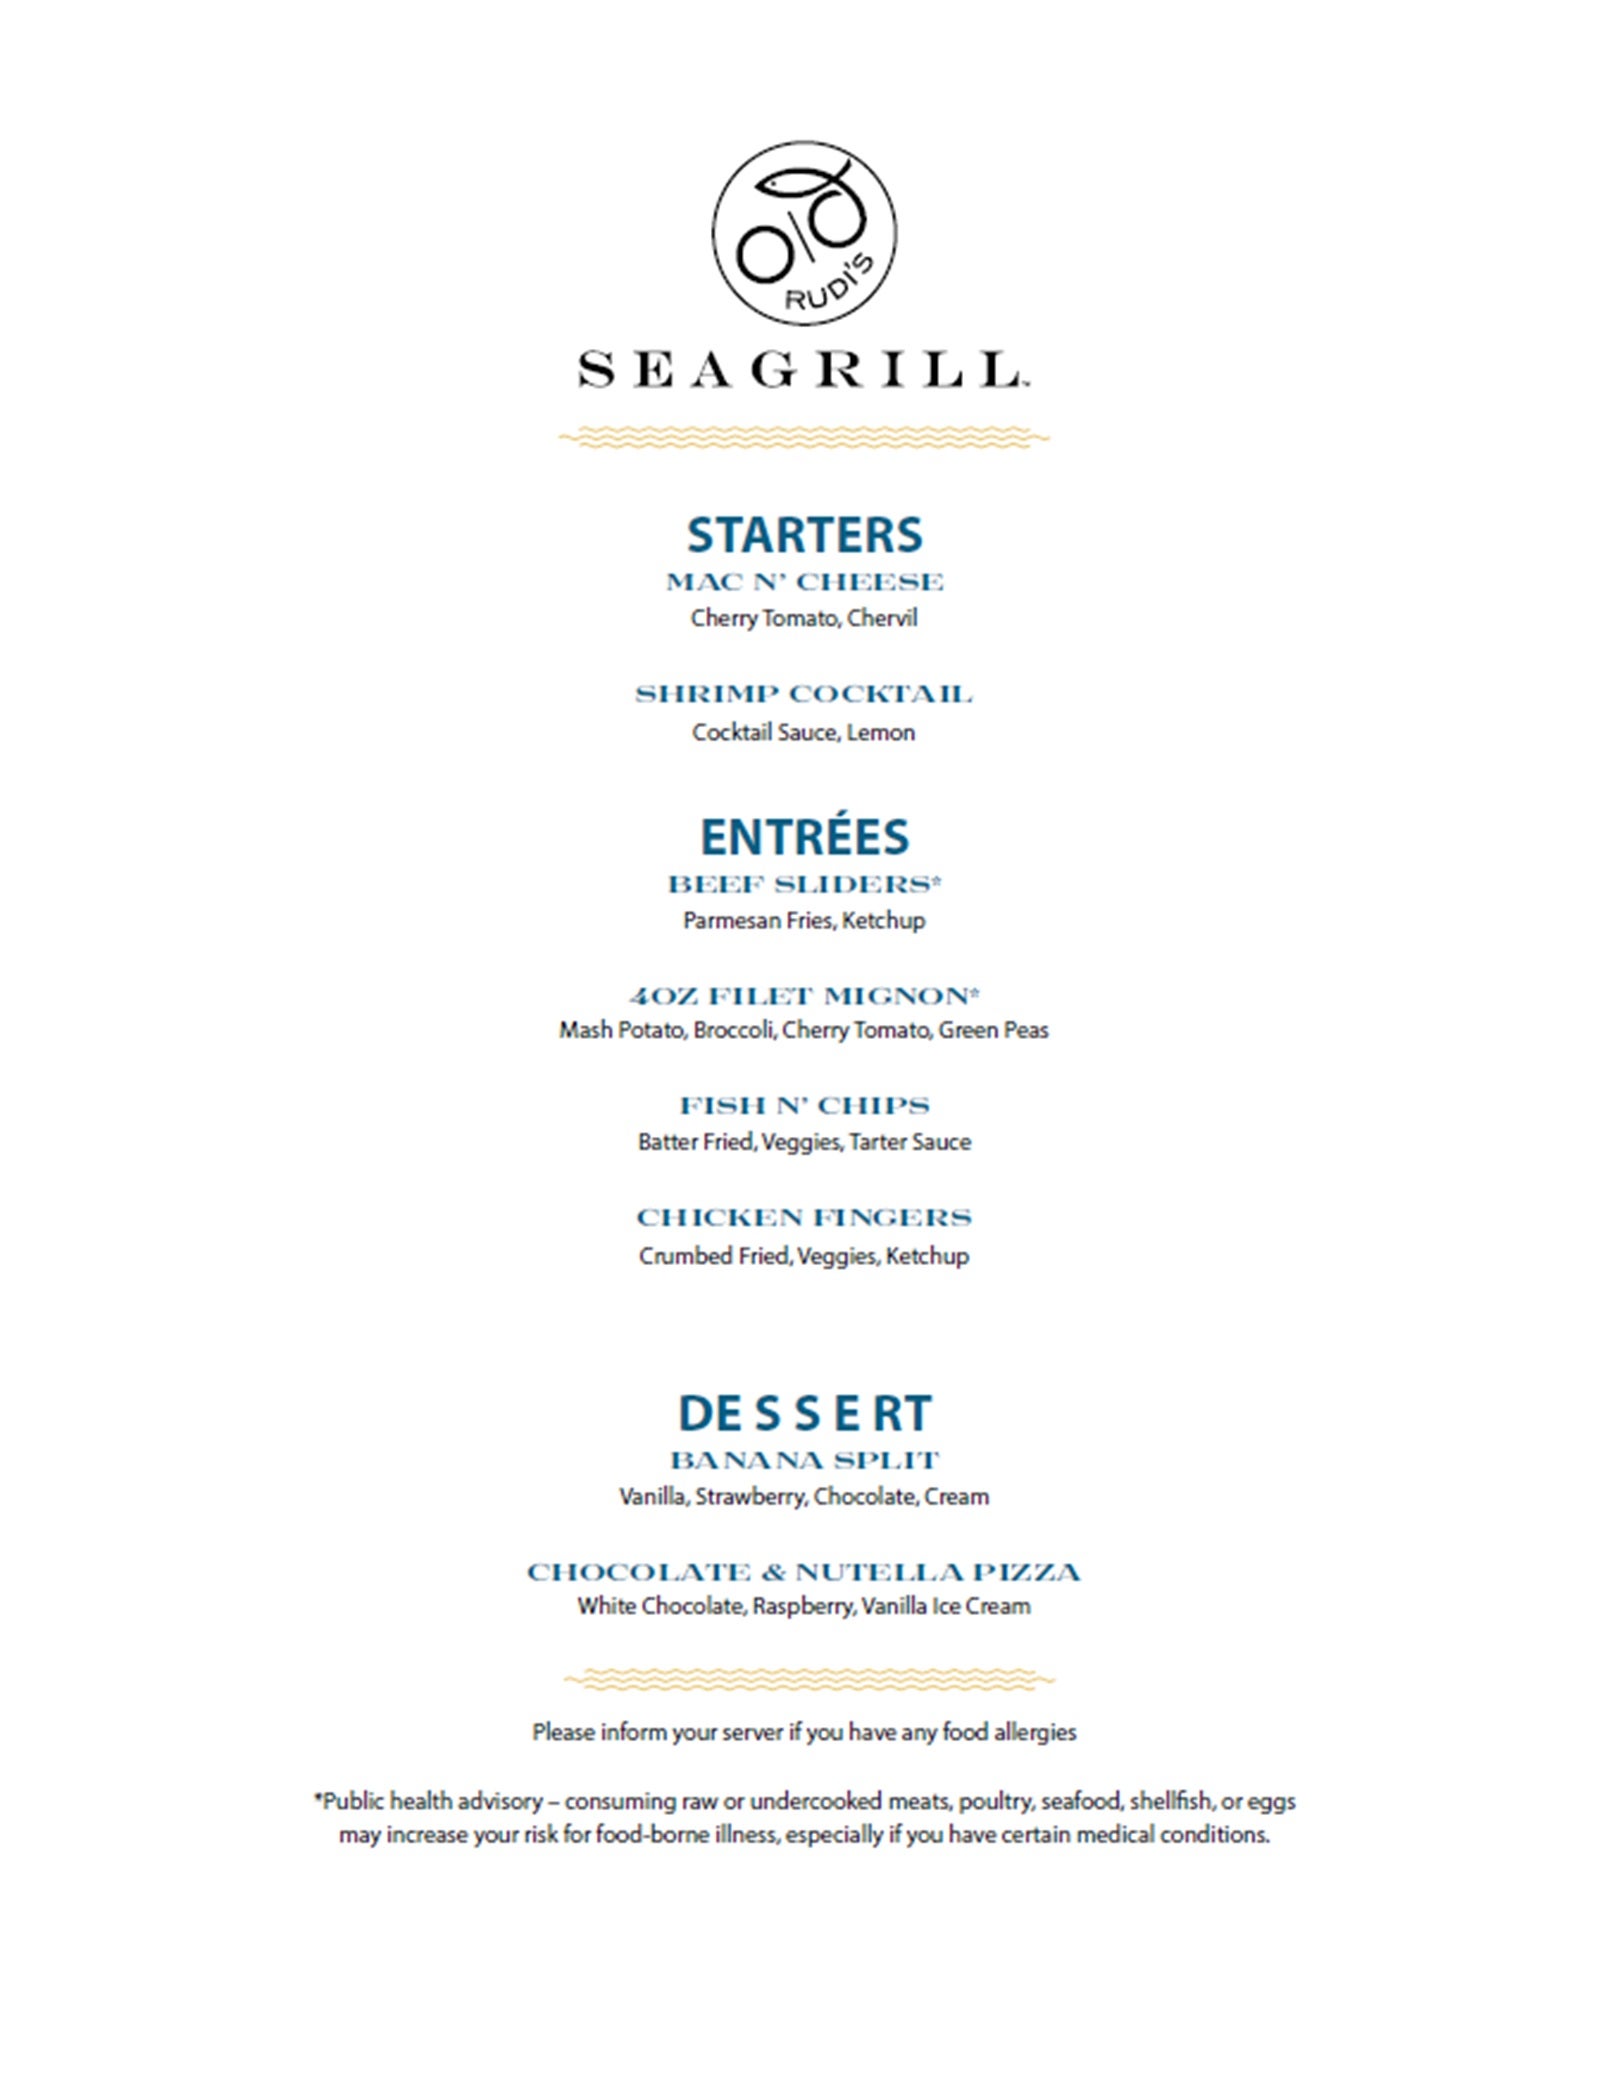 A children's menu from Rudi's Seagrill on Carnival Cruise Line